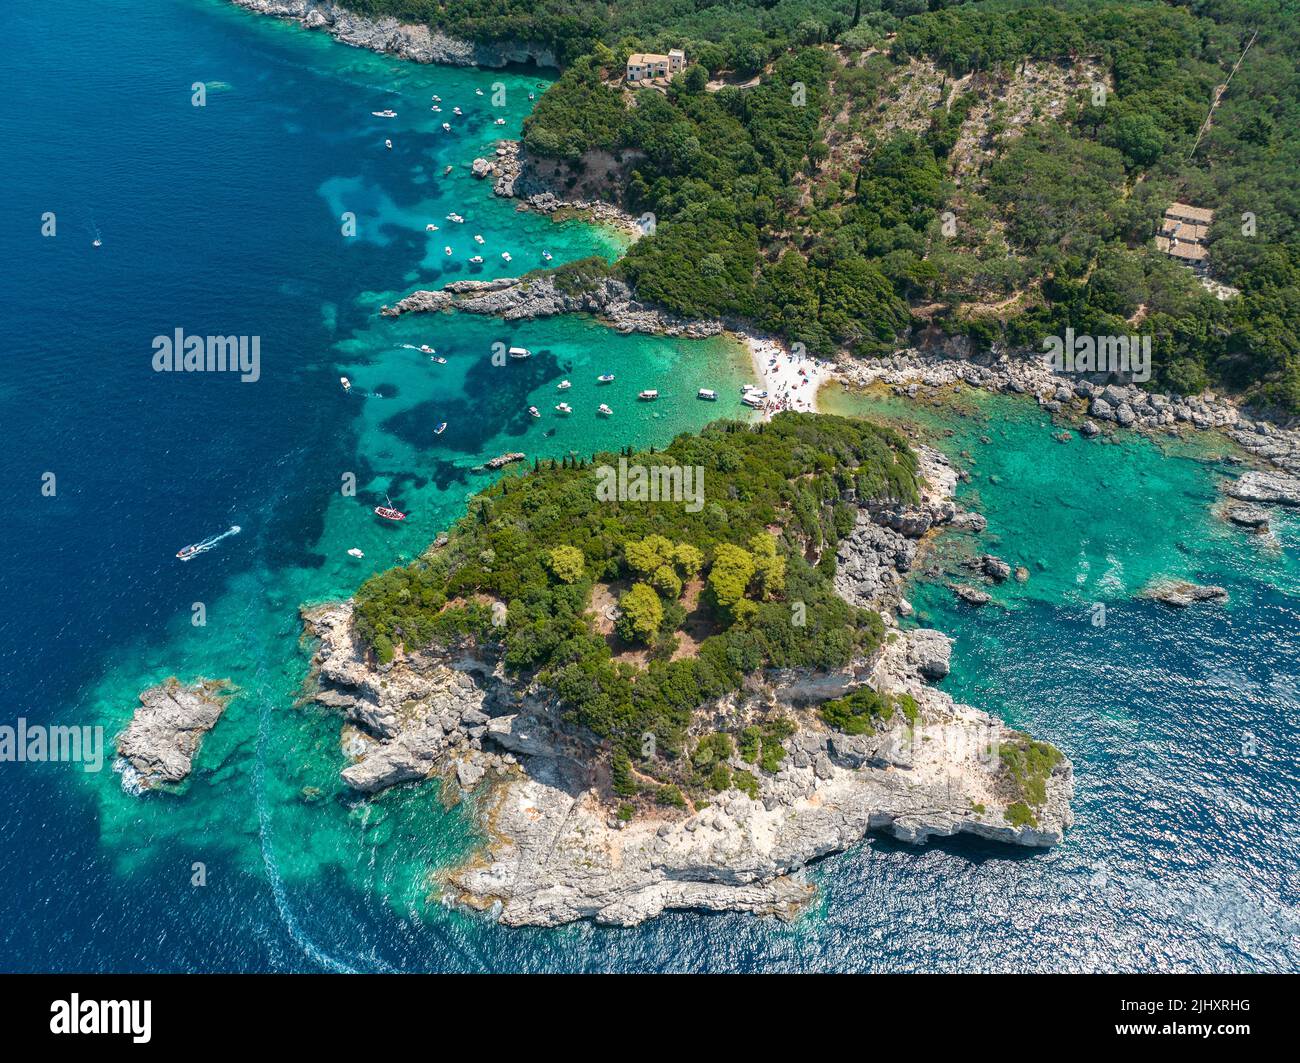 Aerial view of Limni Beach Glyko, on the island of Corfu. Greece. Where the two beaches are connected to the mainland providing a wonderful scenery Stock Photo